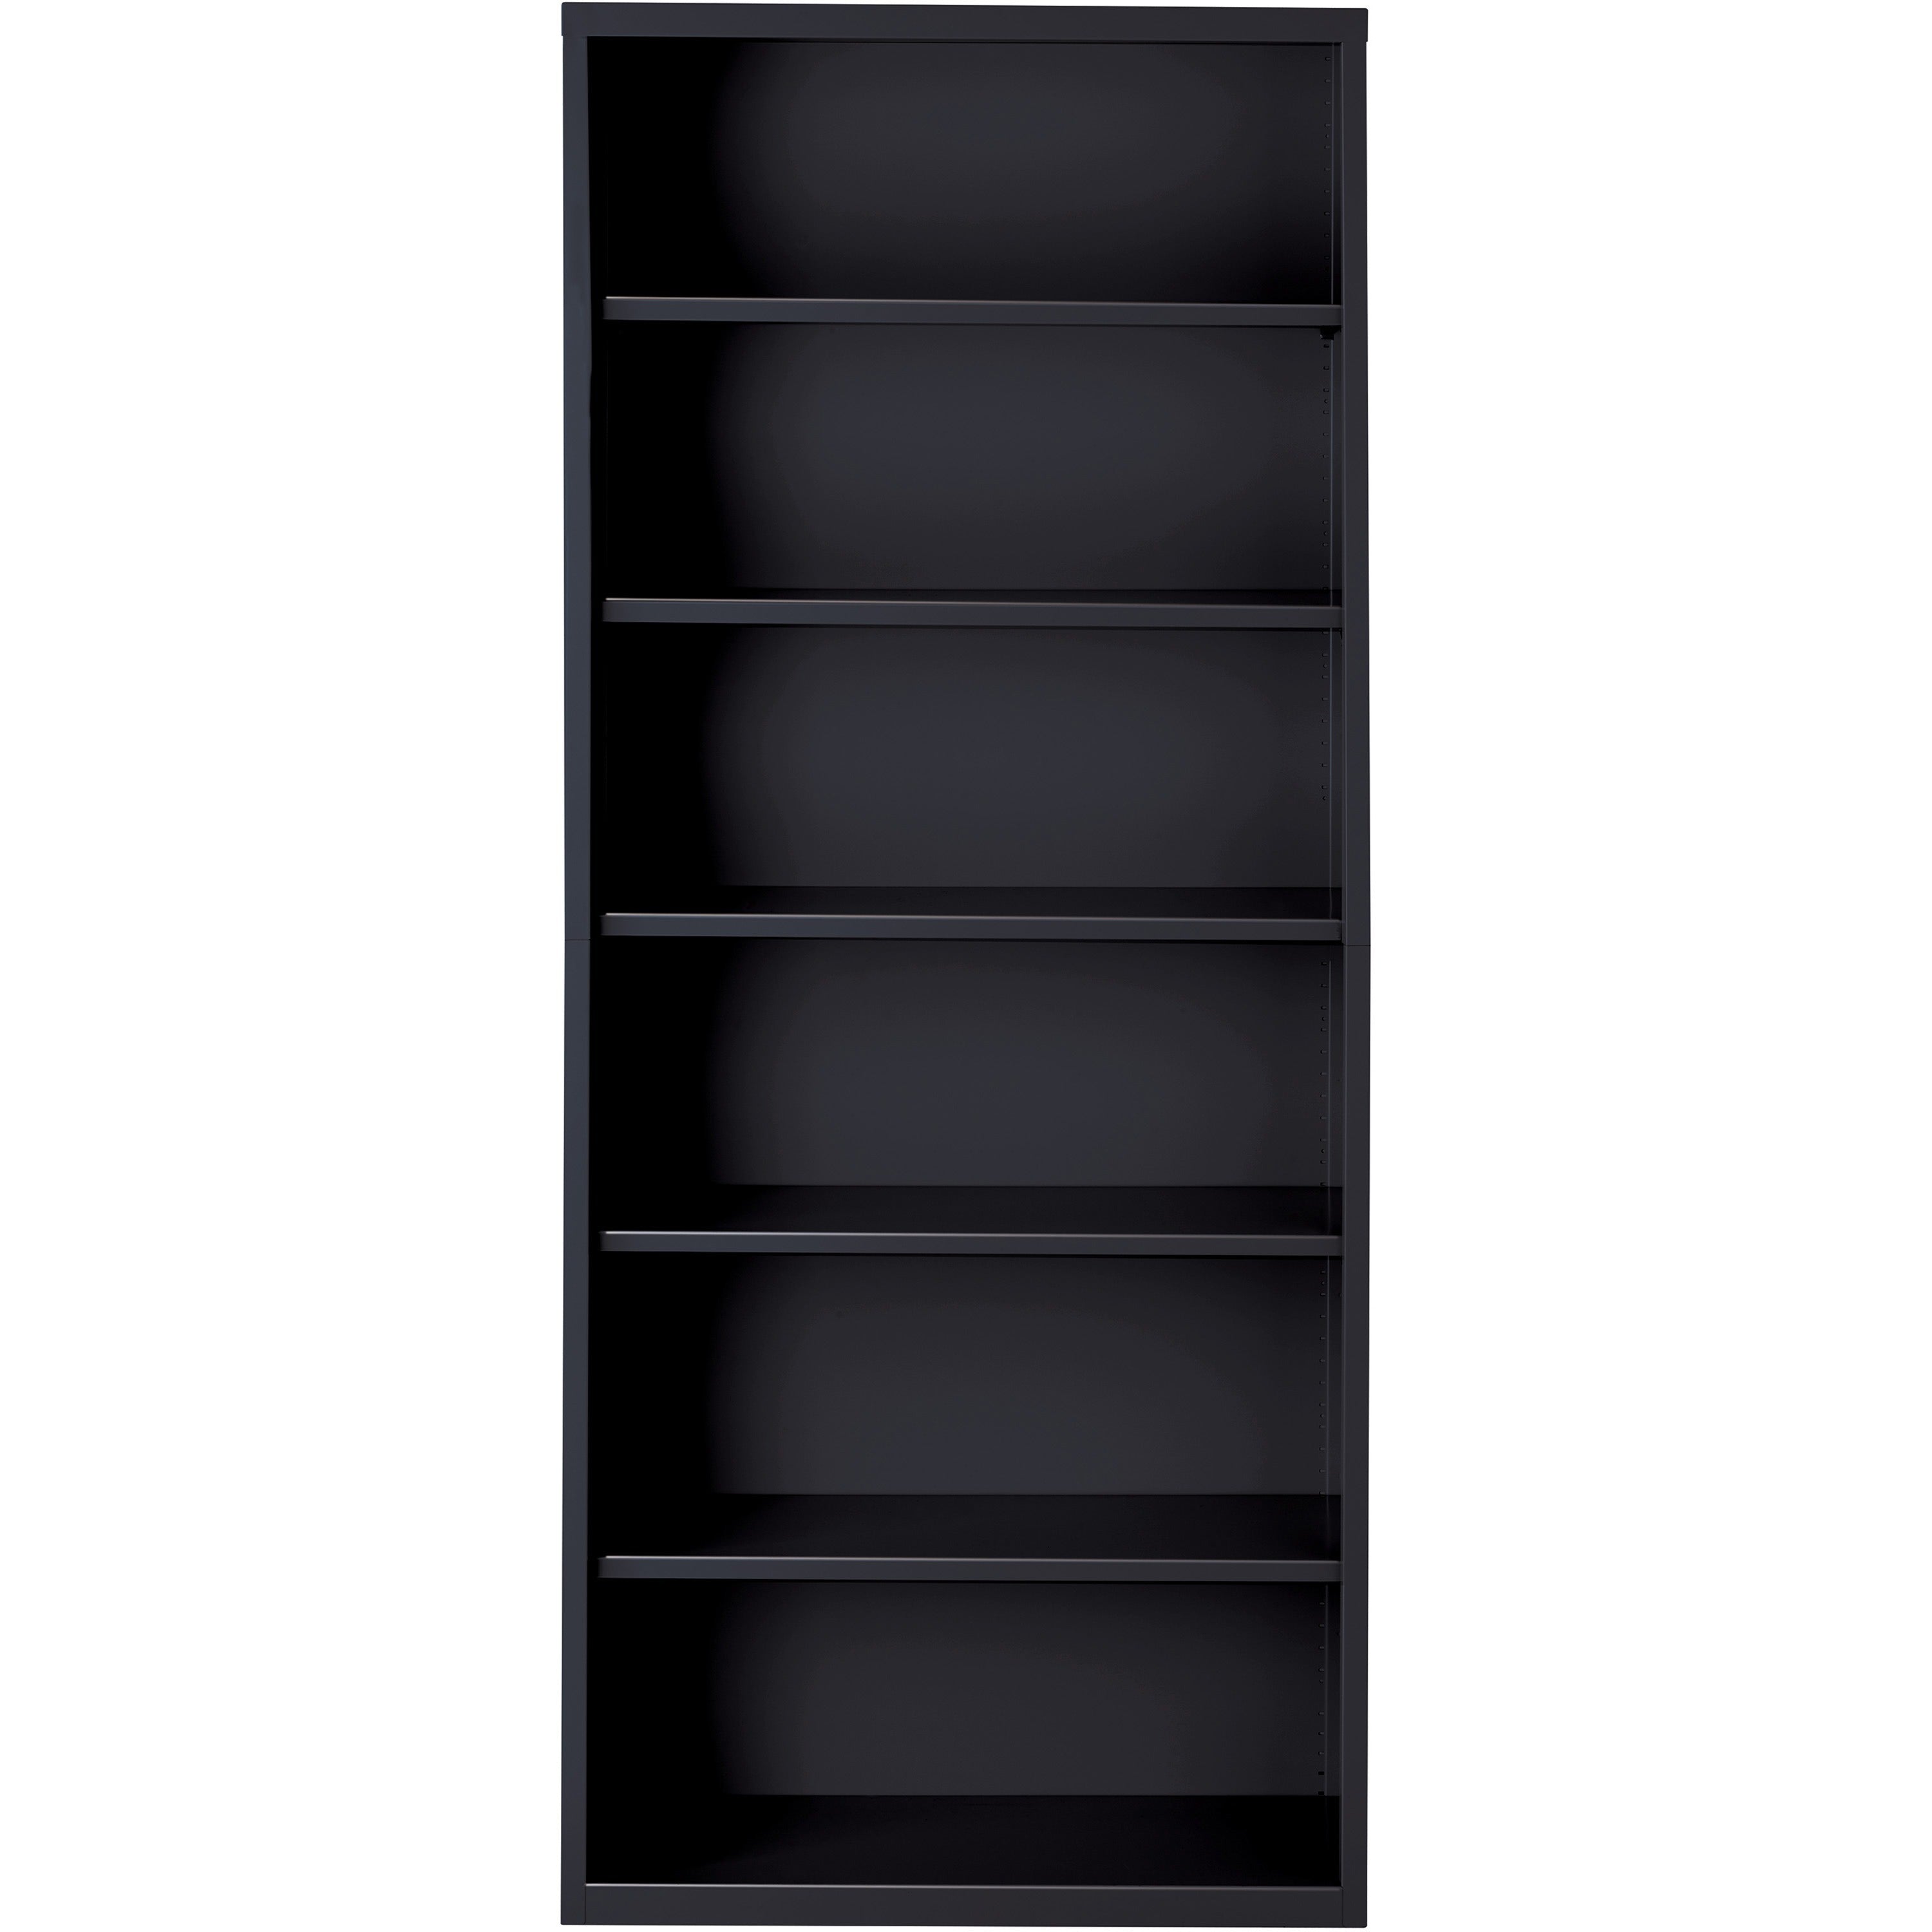 Lorell Fortress Series Bookcase - 34.5" x 13" x 82" - 6 x Shelf(ves) - Black - Powder Coated - Steel - Recycled - 